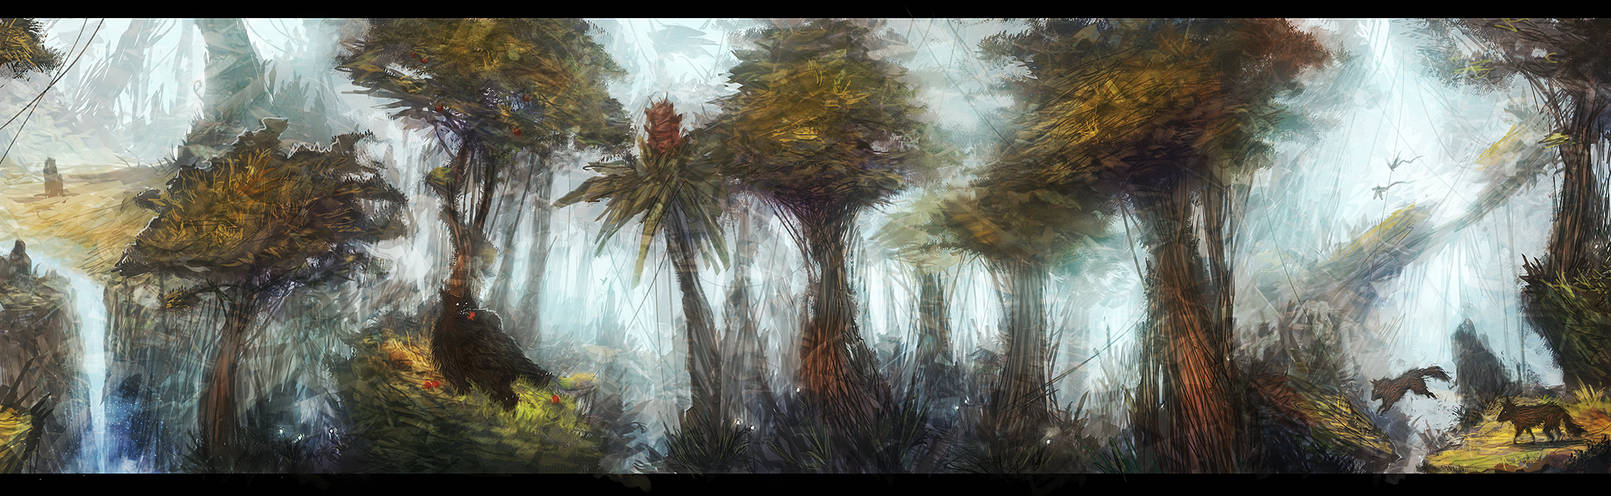 Harmony Forest